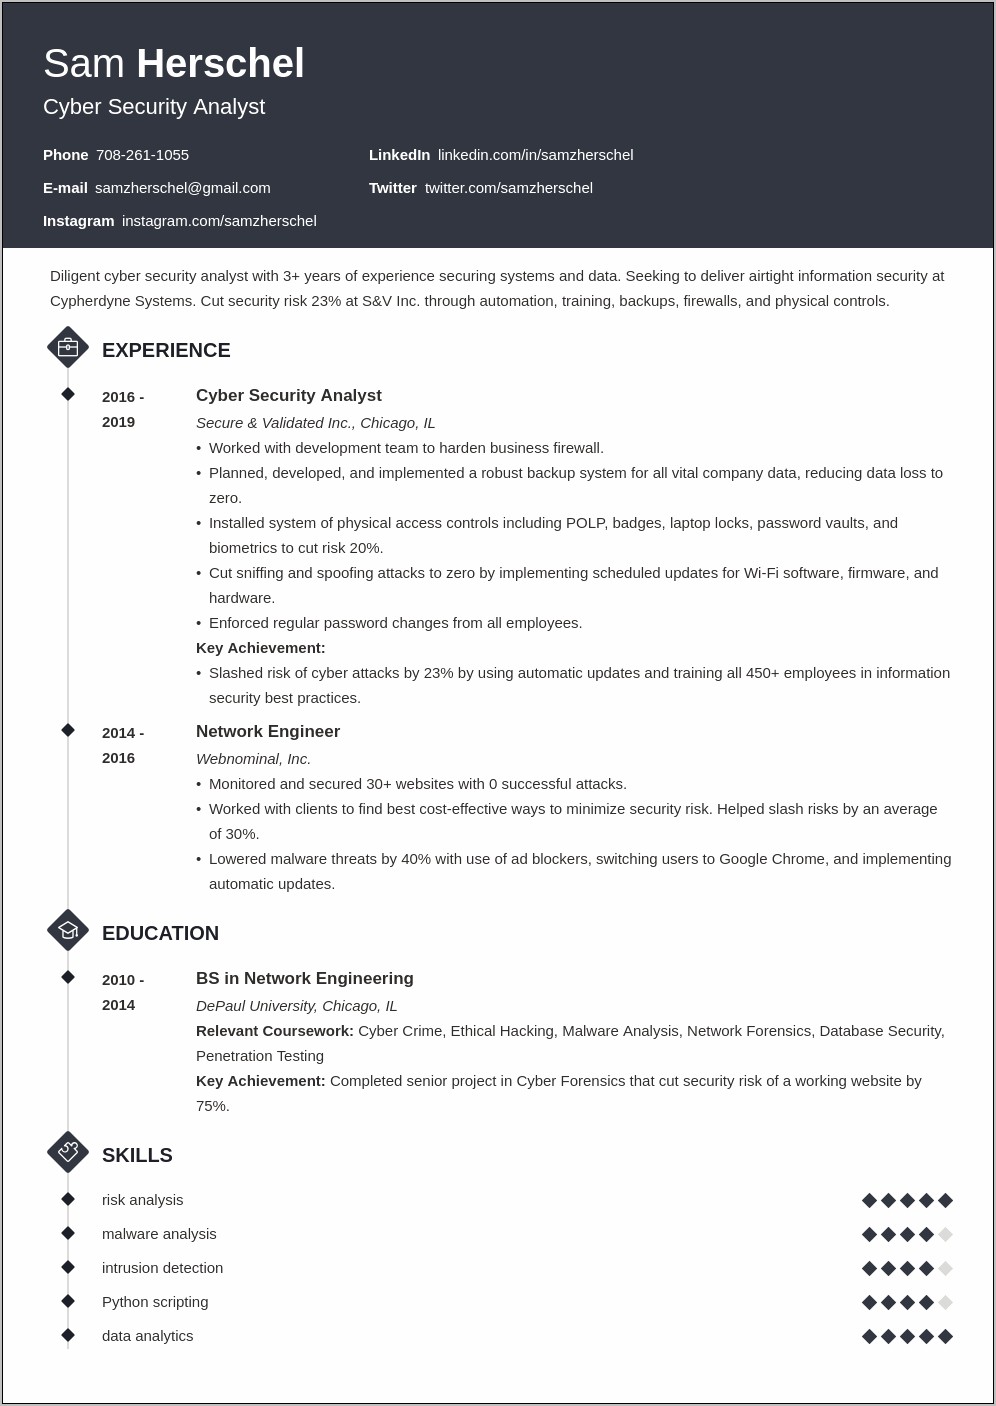 Entry Level Security Job Resume